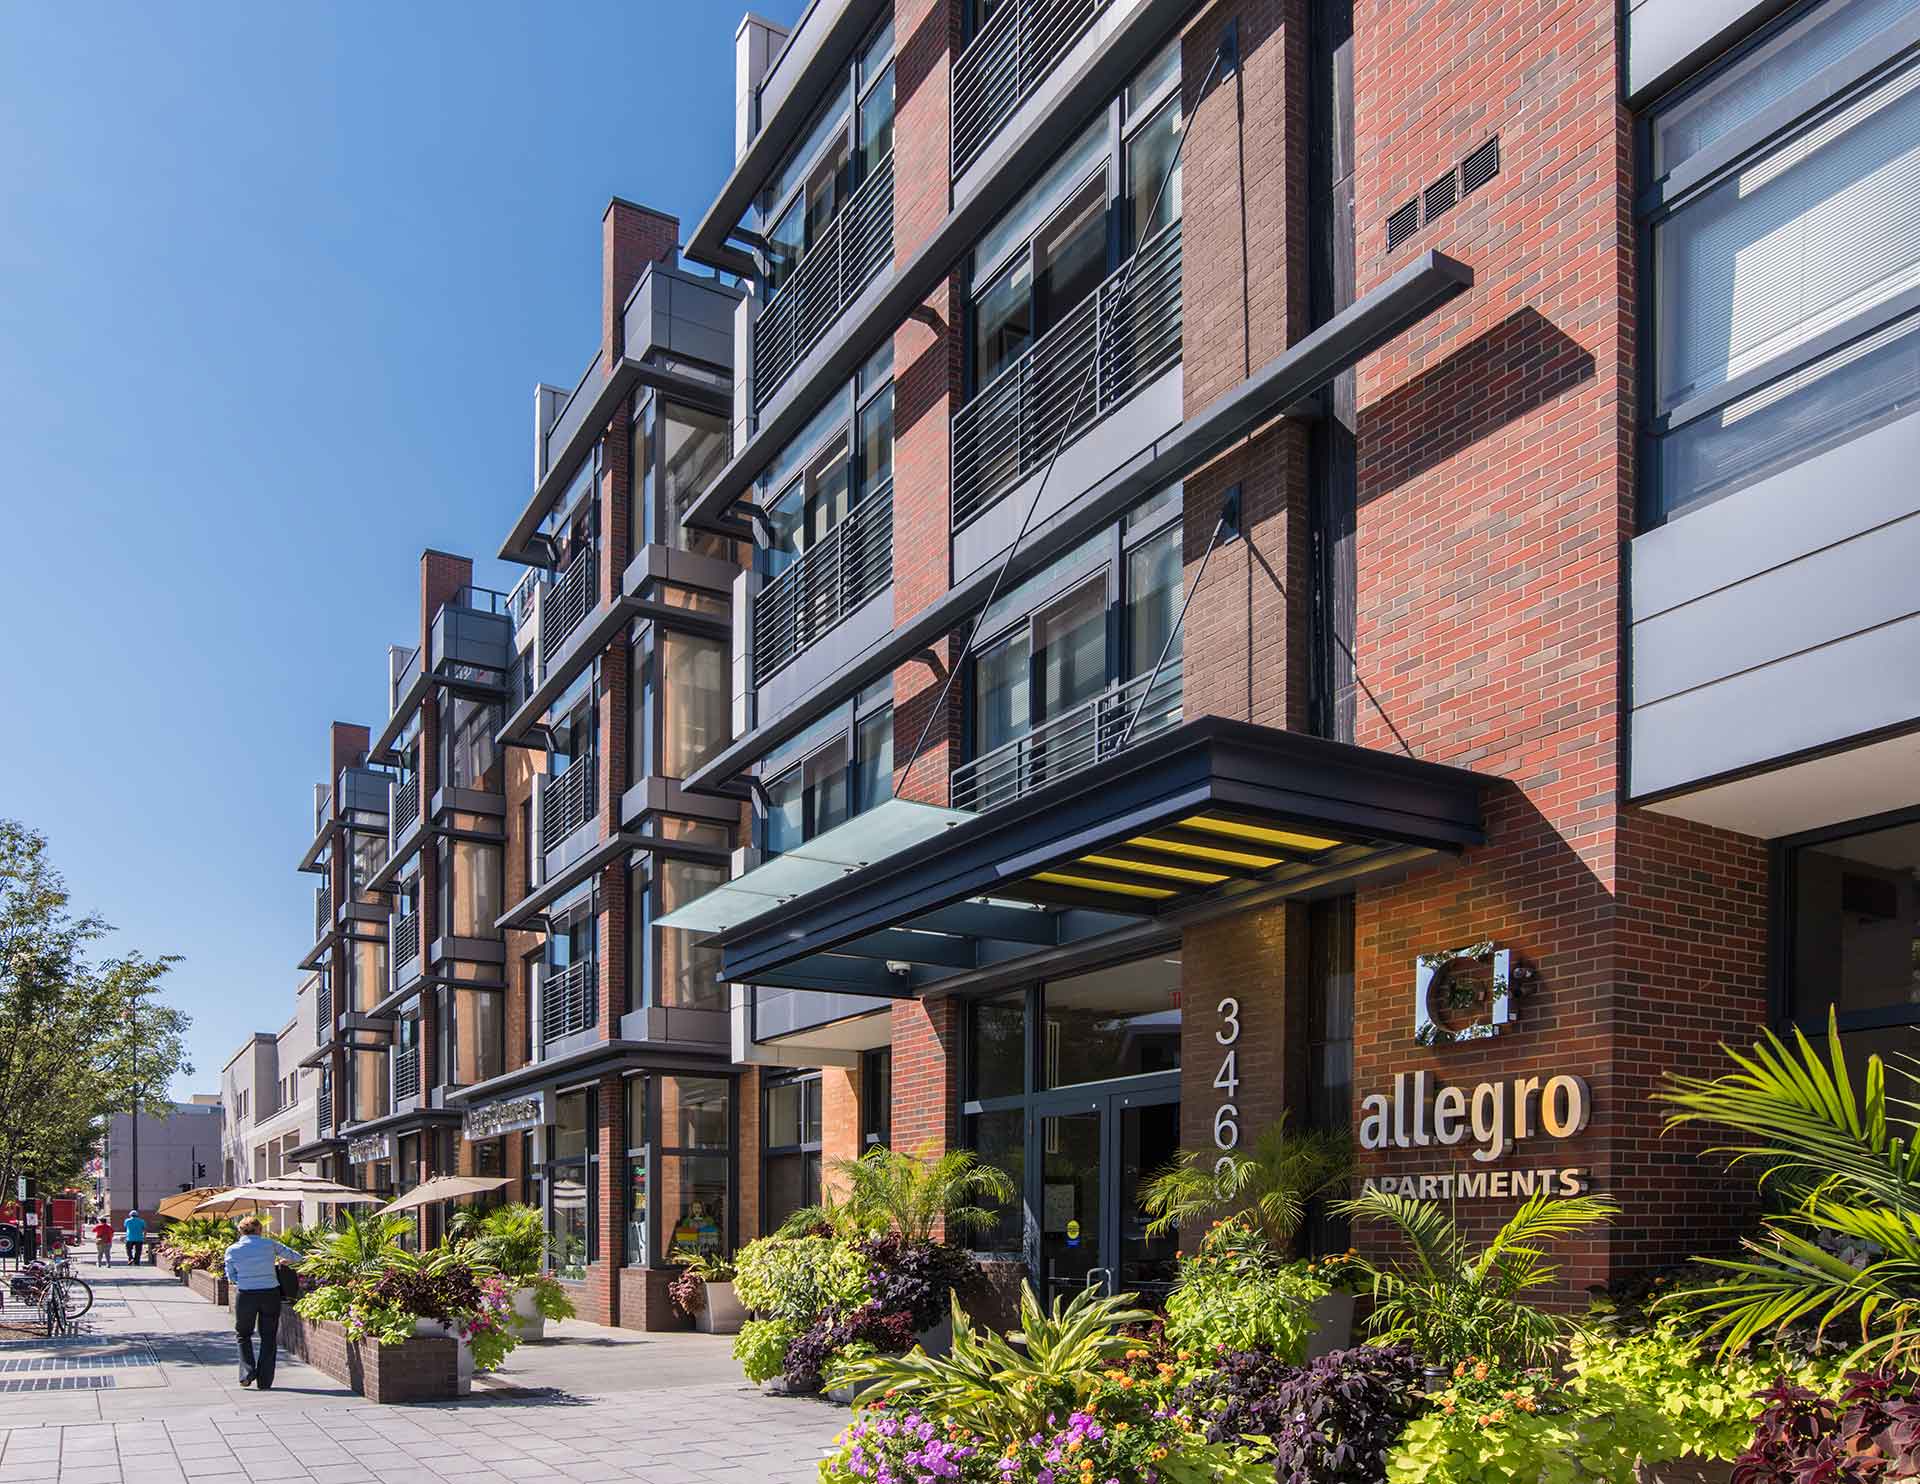 Sidewalk view of Allegro building and entrance on 14th Street facing South on a sunny day